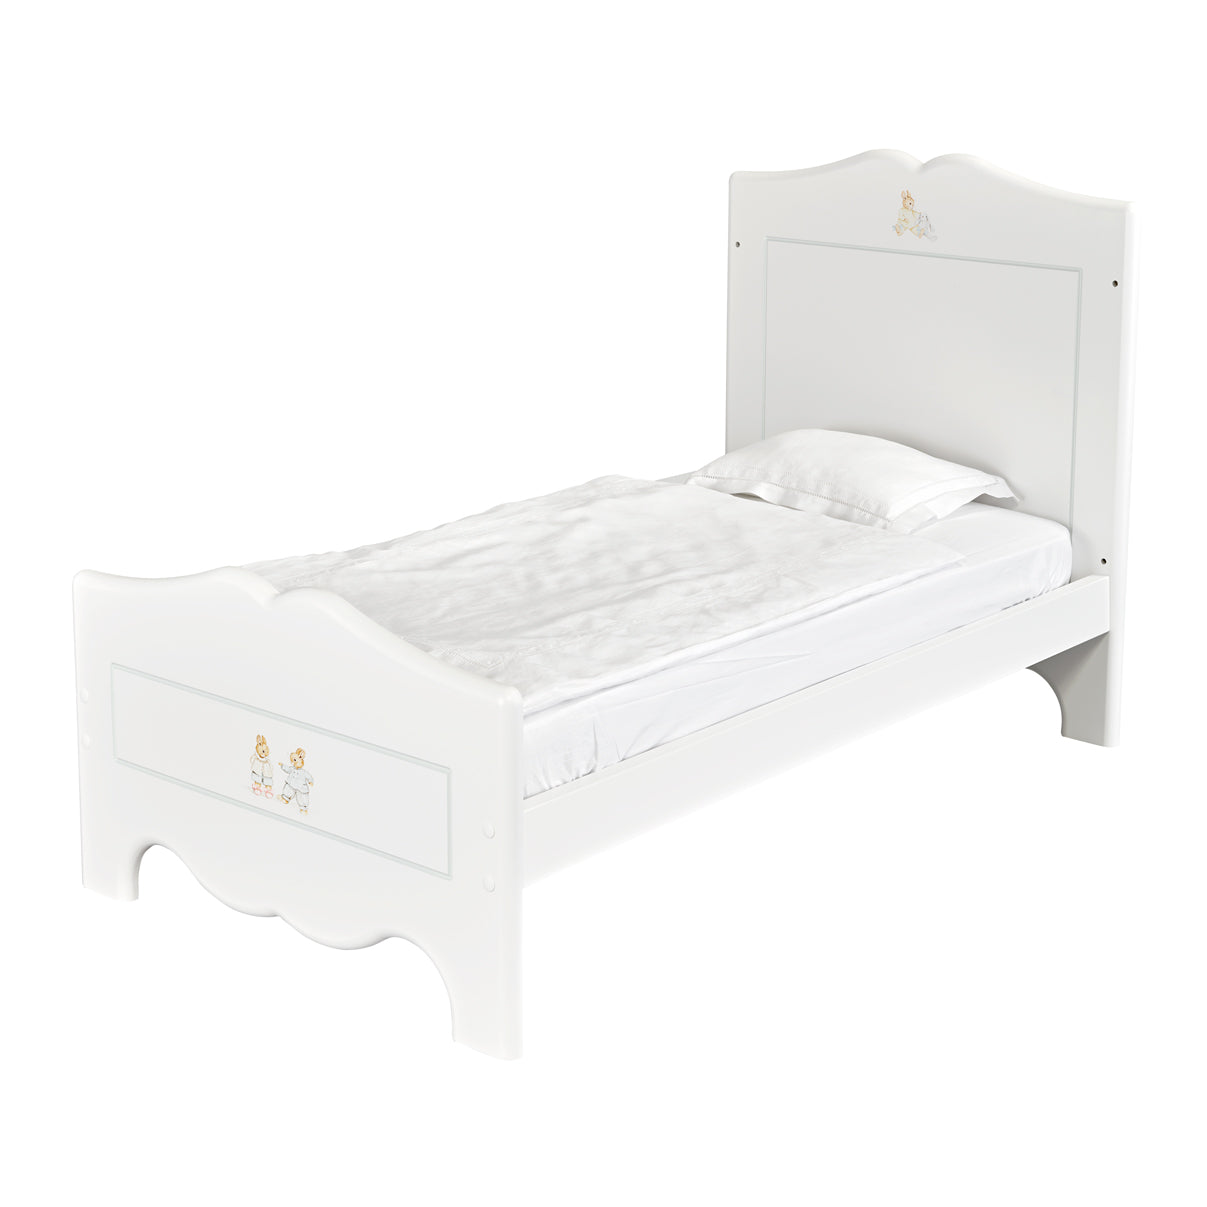 Dragons Cot Bed - Designer Bunnies with Chic Grey Trim